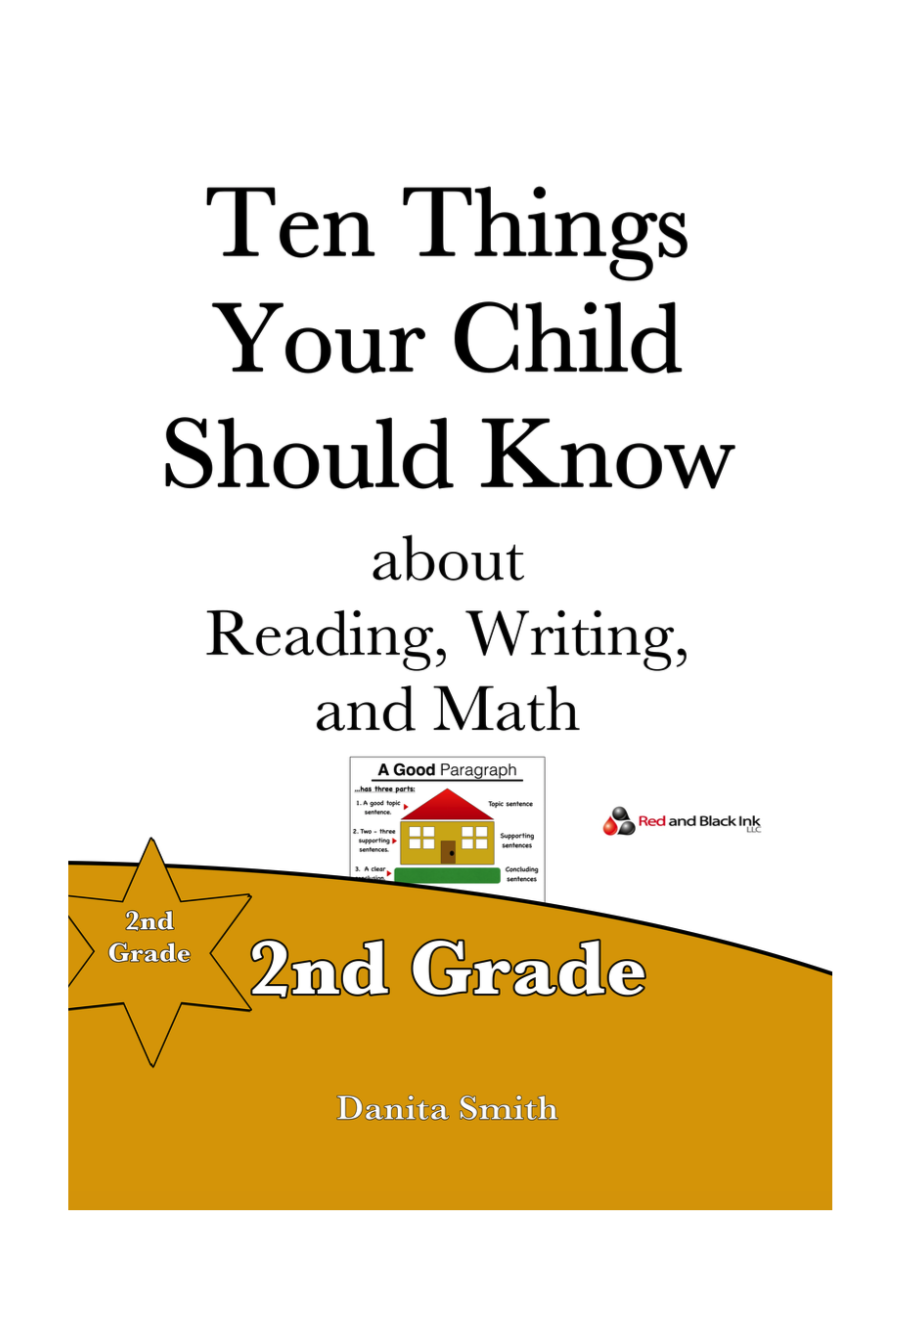 Final - Ten Things Your Child Should Know - 2nd Grade.png